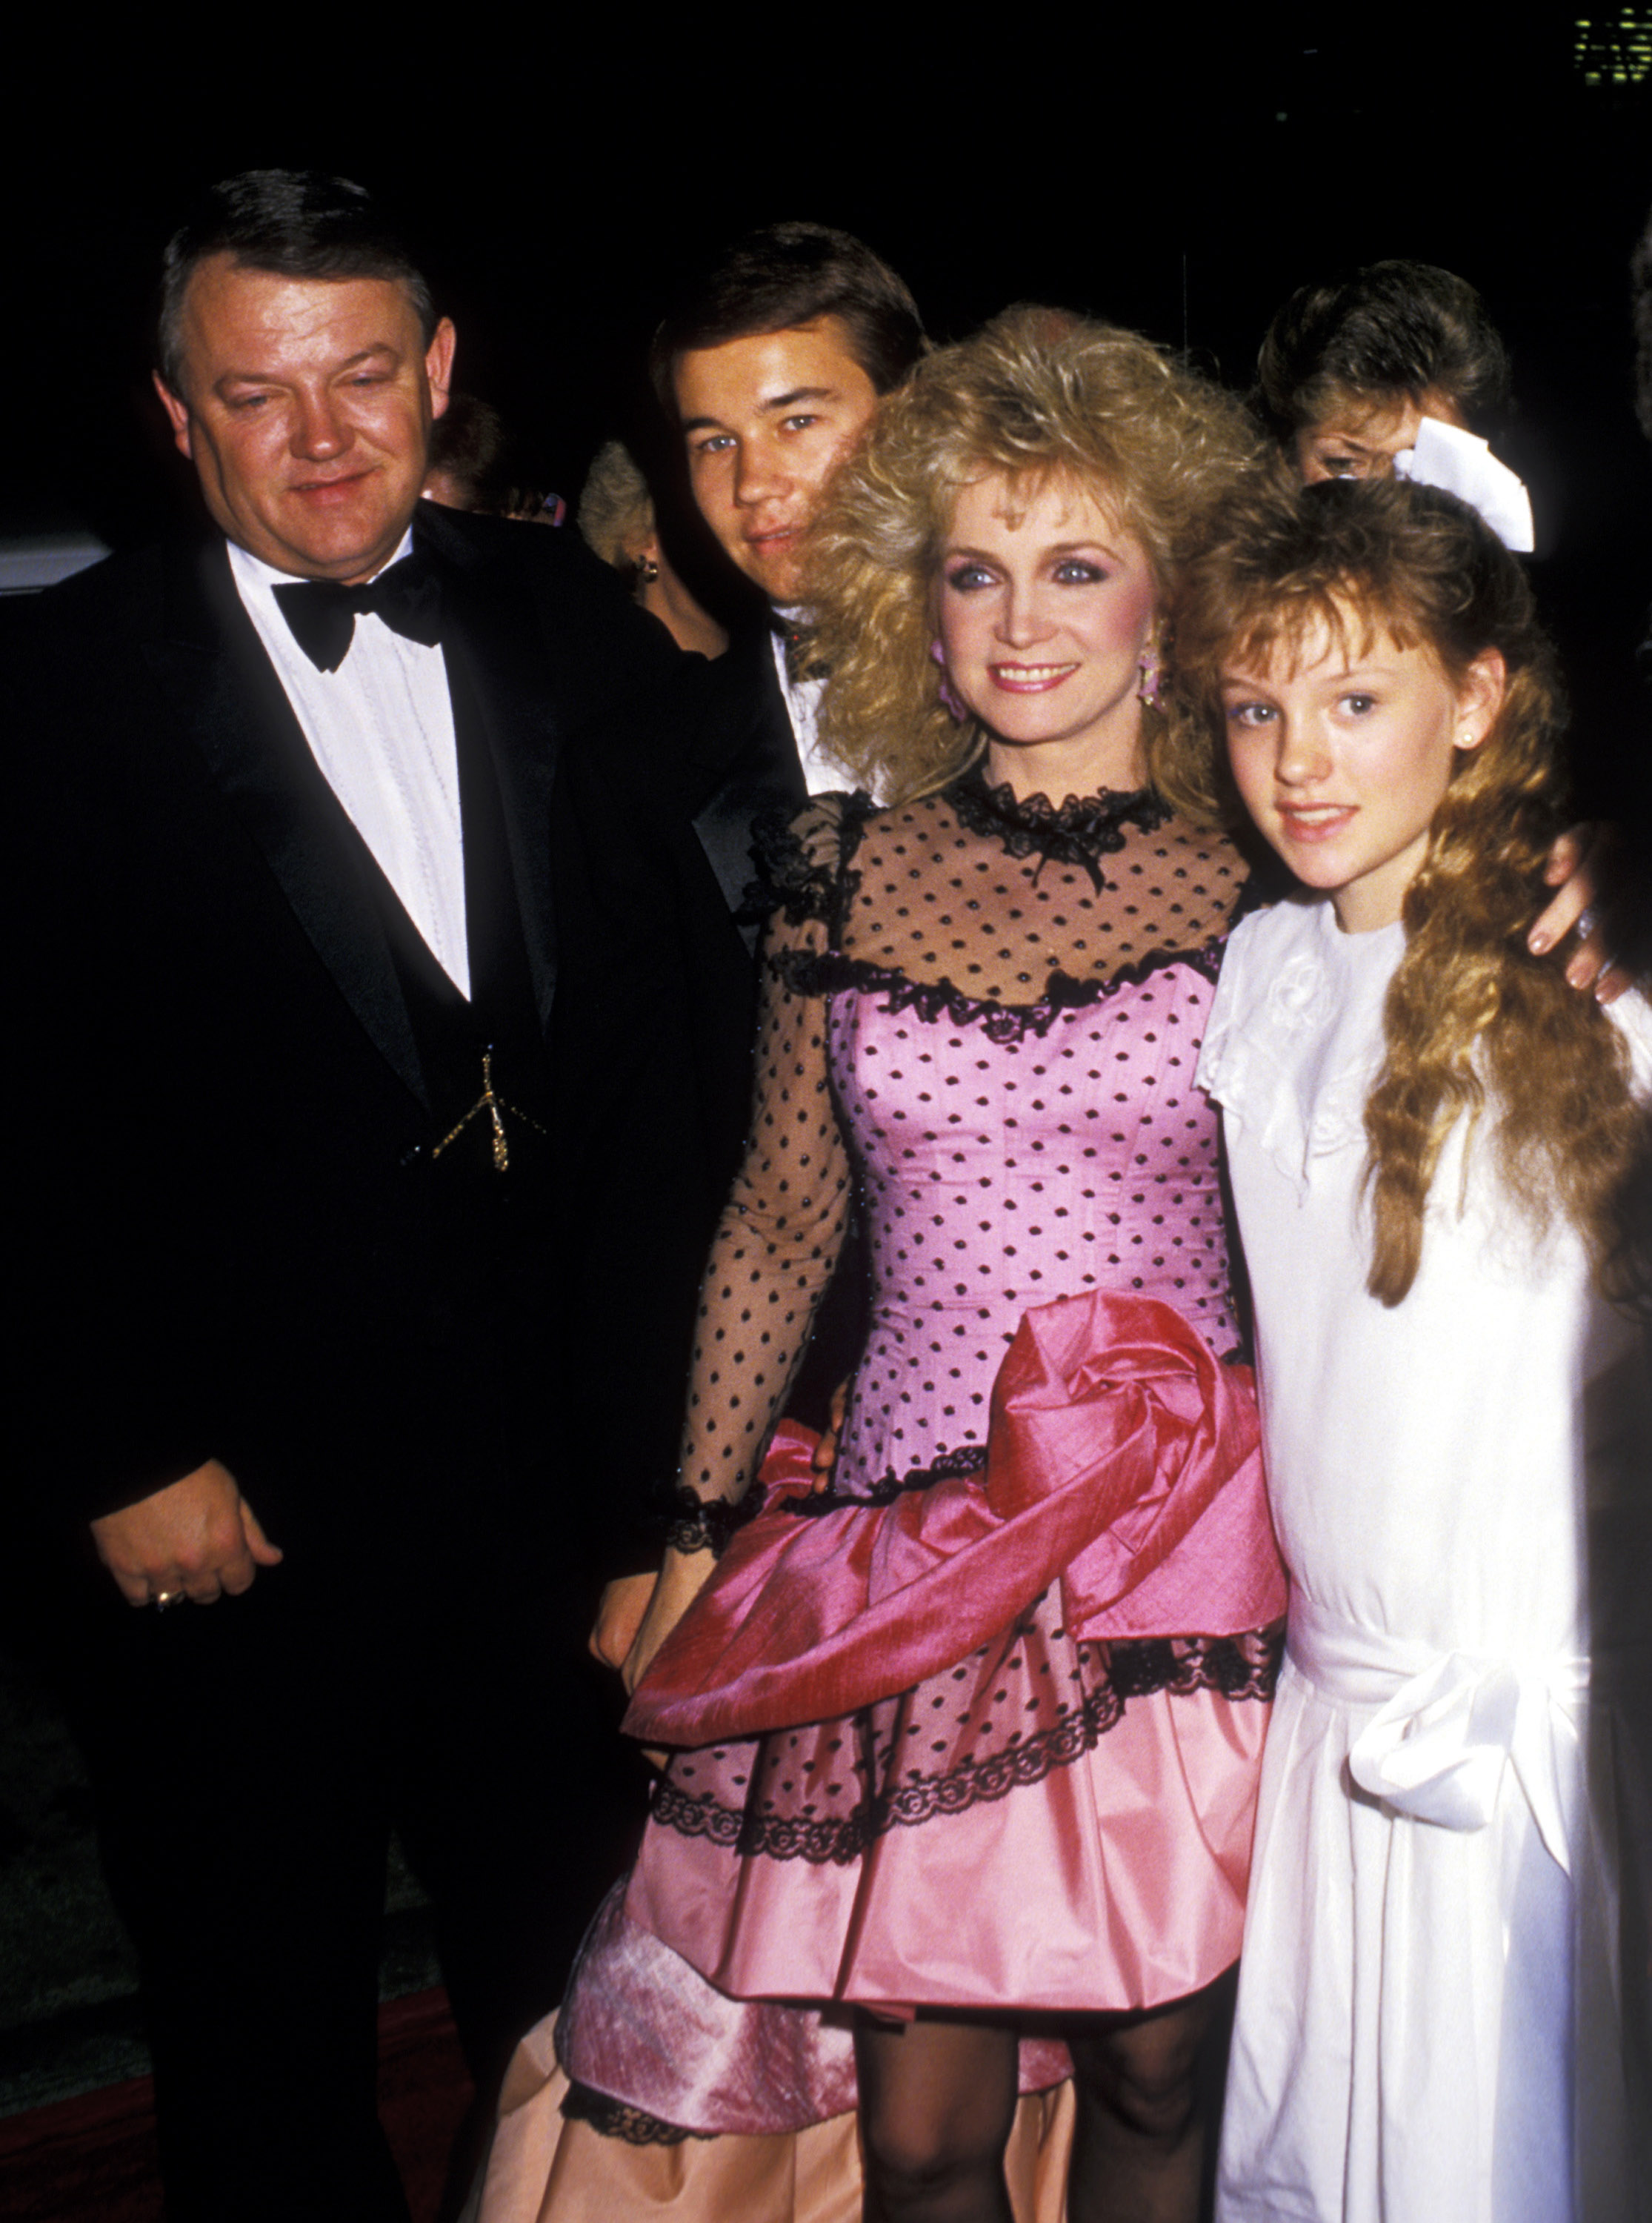 Ken Dudney, Matthew Dudney, Barbara Mandrell, and Jaime Nicole Dudney at the After Party For The 14th Annual People's Choice Awards, on March 13, 1988. | Source: Getty Images